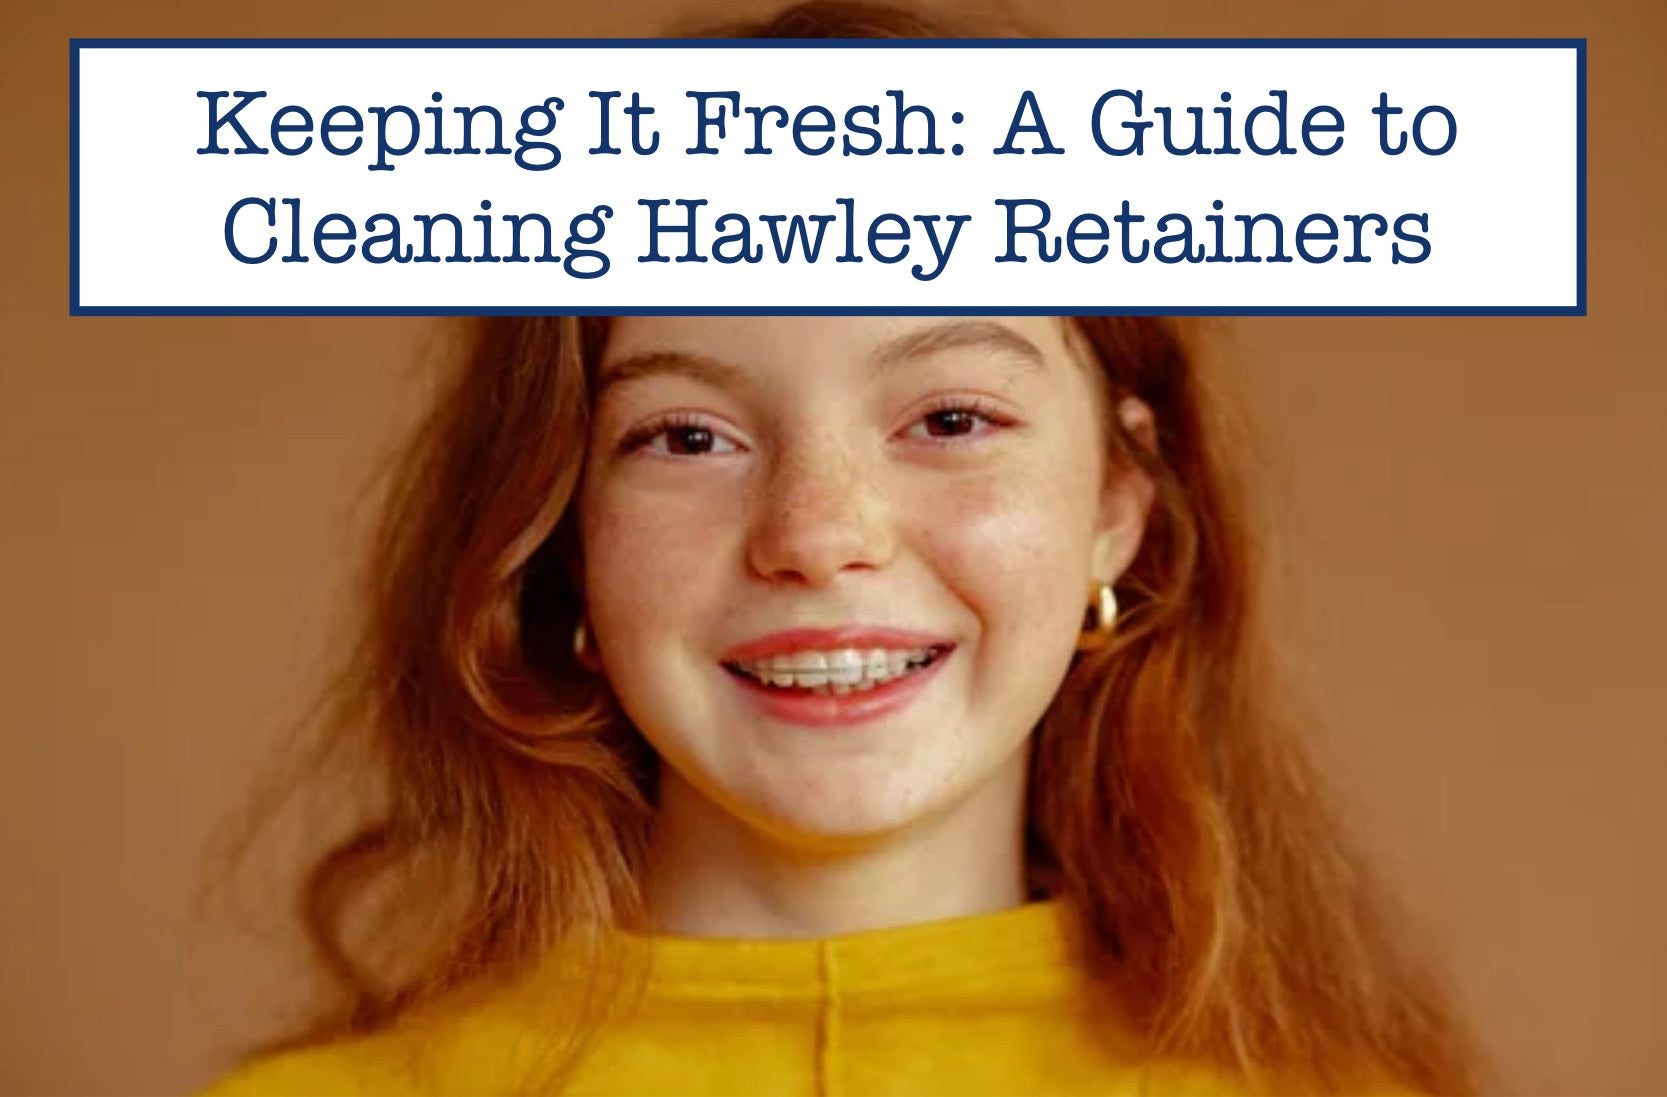 Keeping It Fresh: A Guide to Cleaning Hawley Retainers